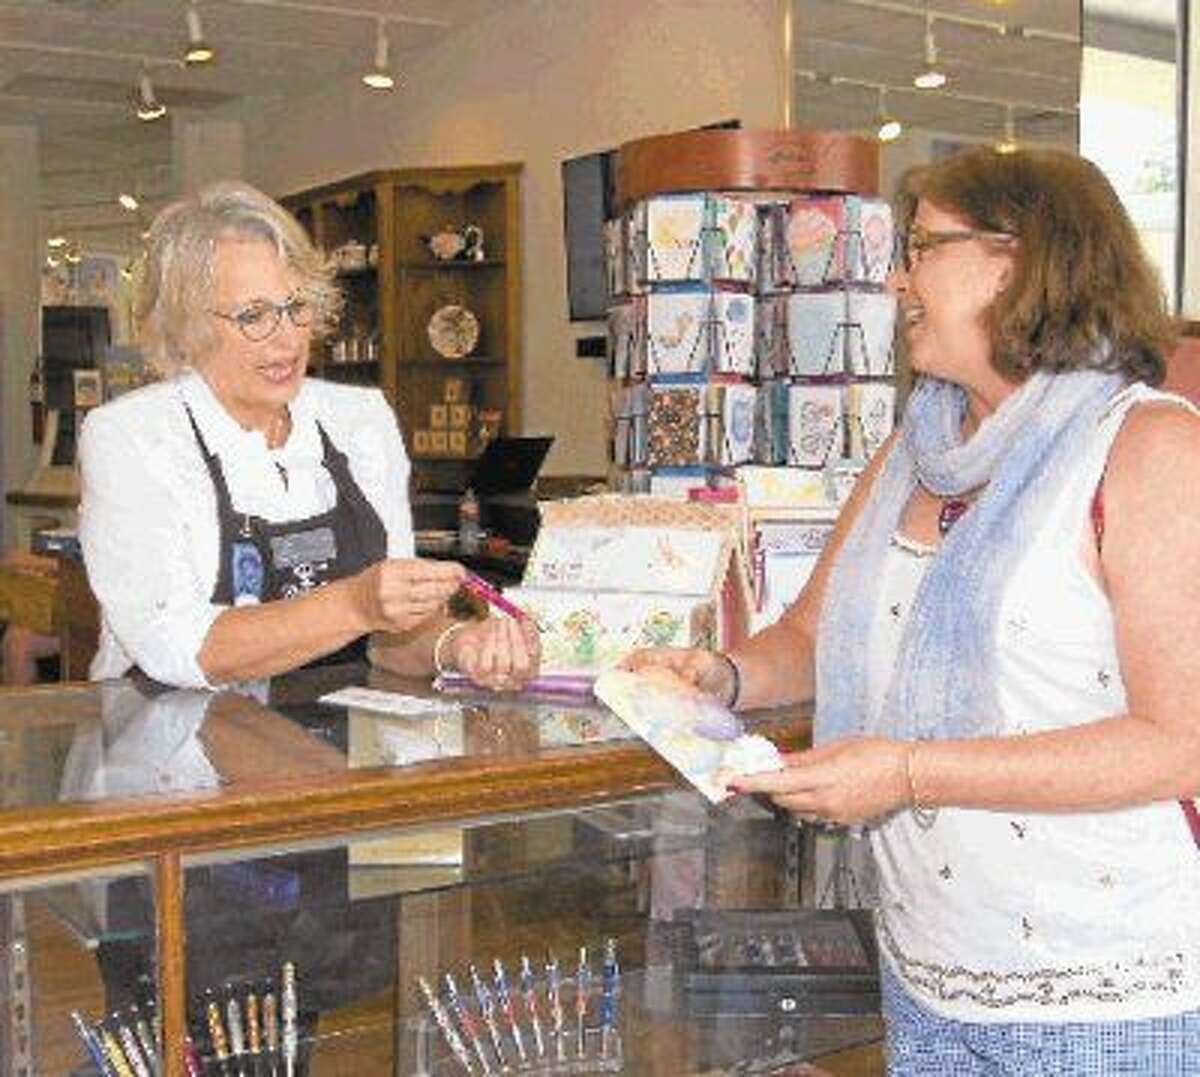 Jill Stacy of Houston, right, chooses a hand-crafted pen gift with the assistance of Cyndy Oller, volunteer store coordinator and New Danville board member.